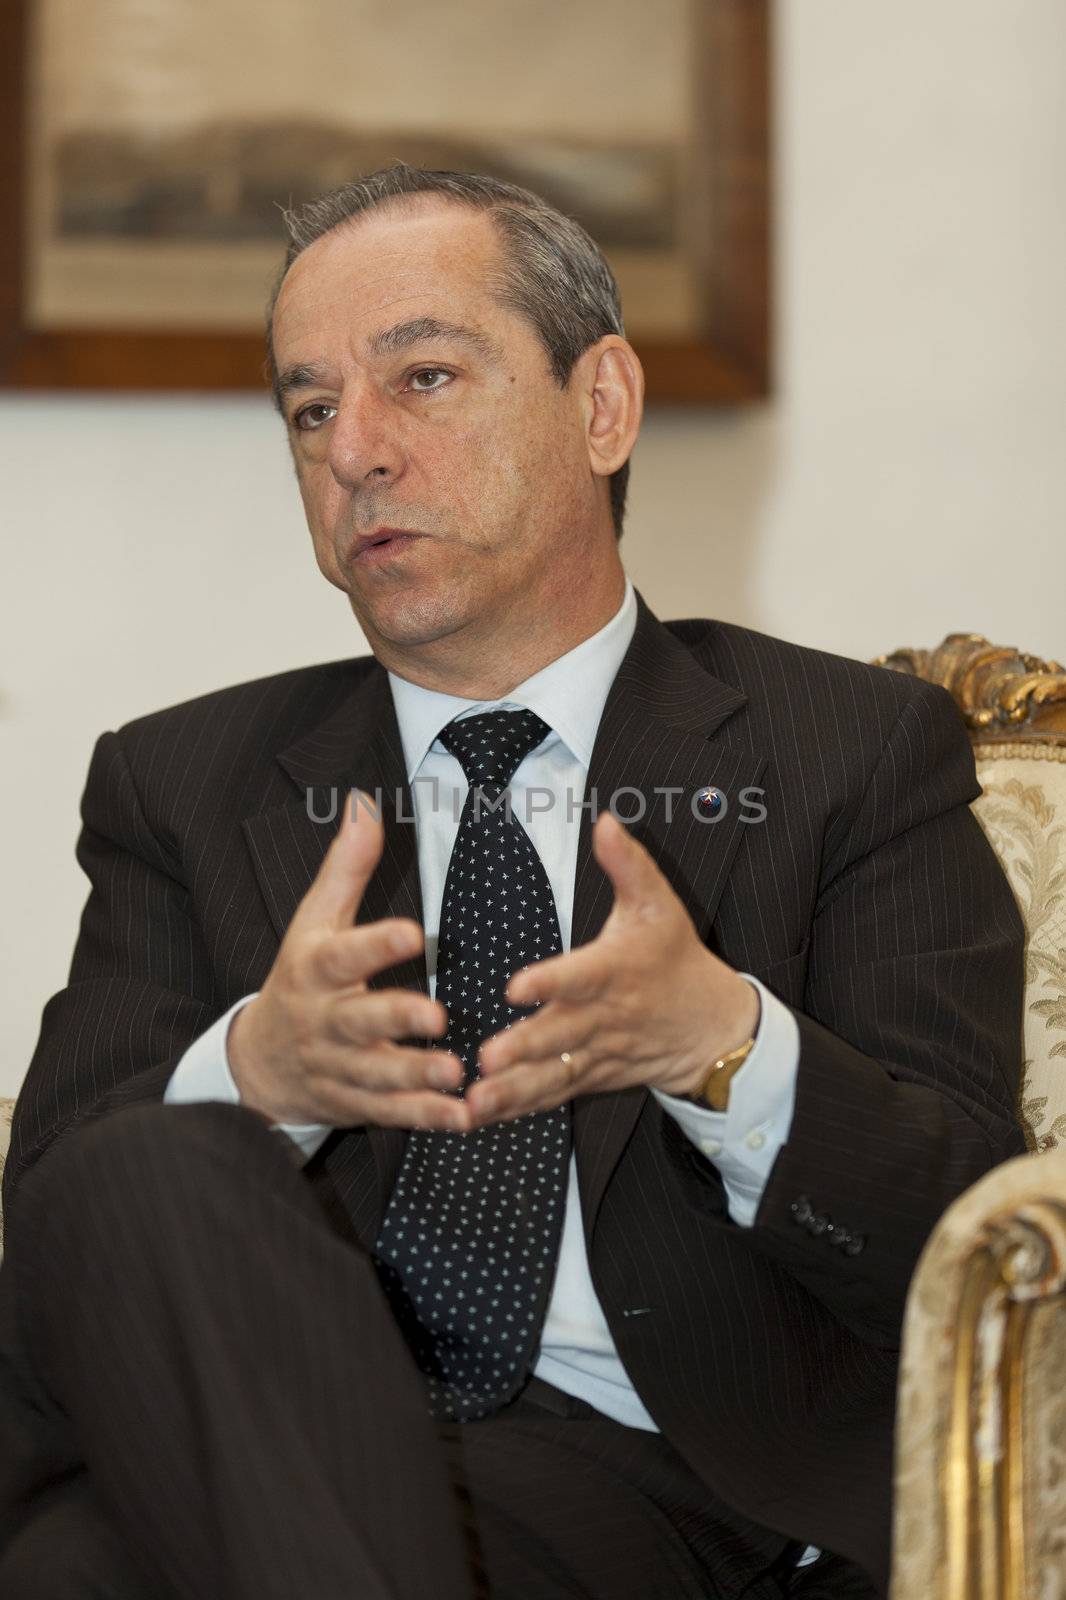 OPM, AUBERGE DE CASTILLE, VALLETTA, MALTA - MAY 12 - The Prime Minister of Malta, Dr. Lawrence Gonzi, with reporters from The Report Company in partnership with of Guardian News and Media UK on 12 May 2011.